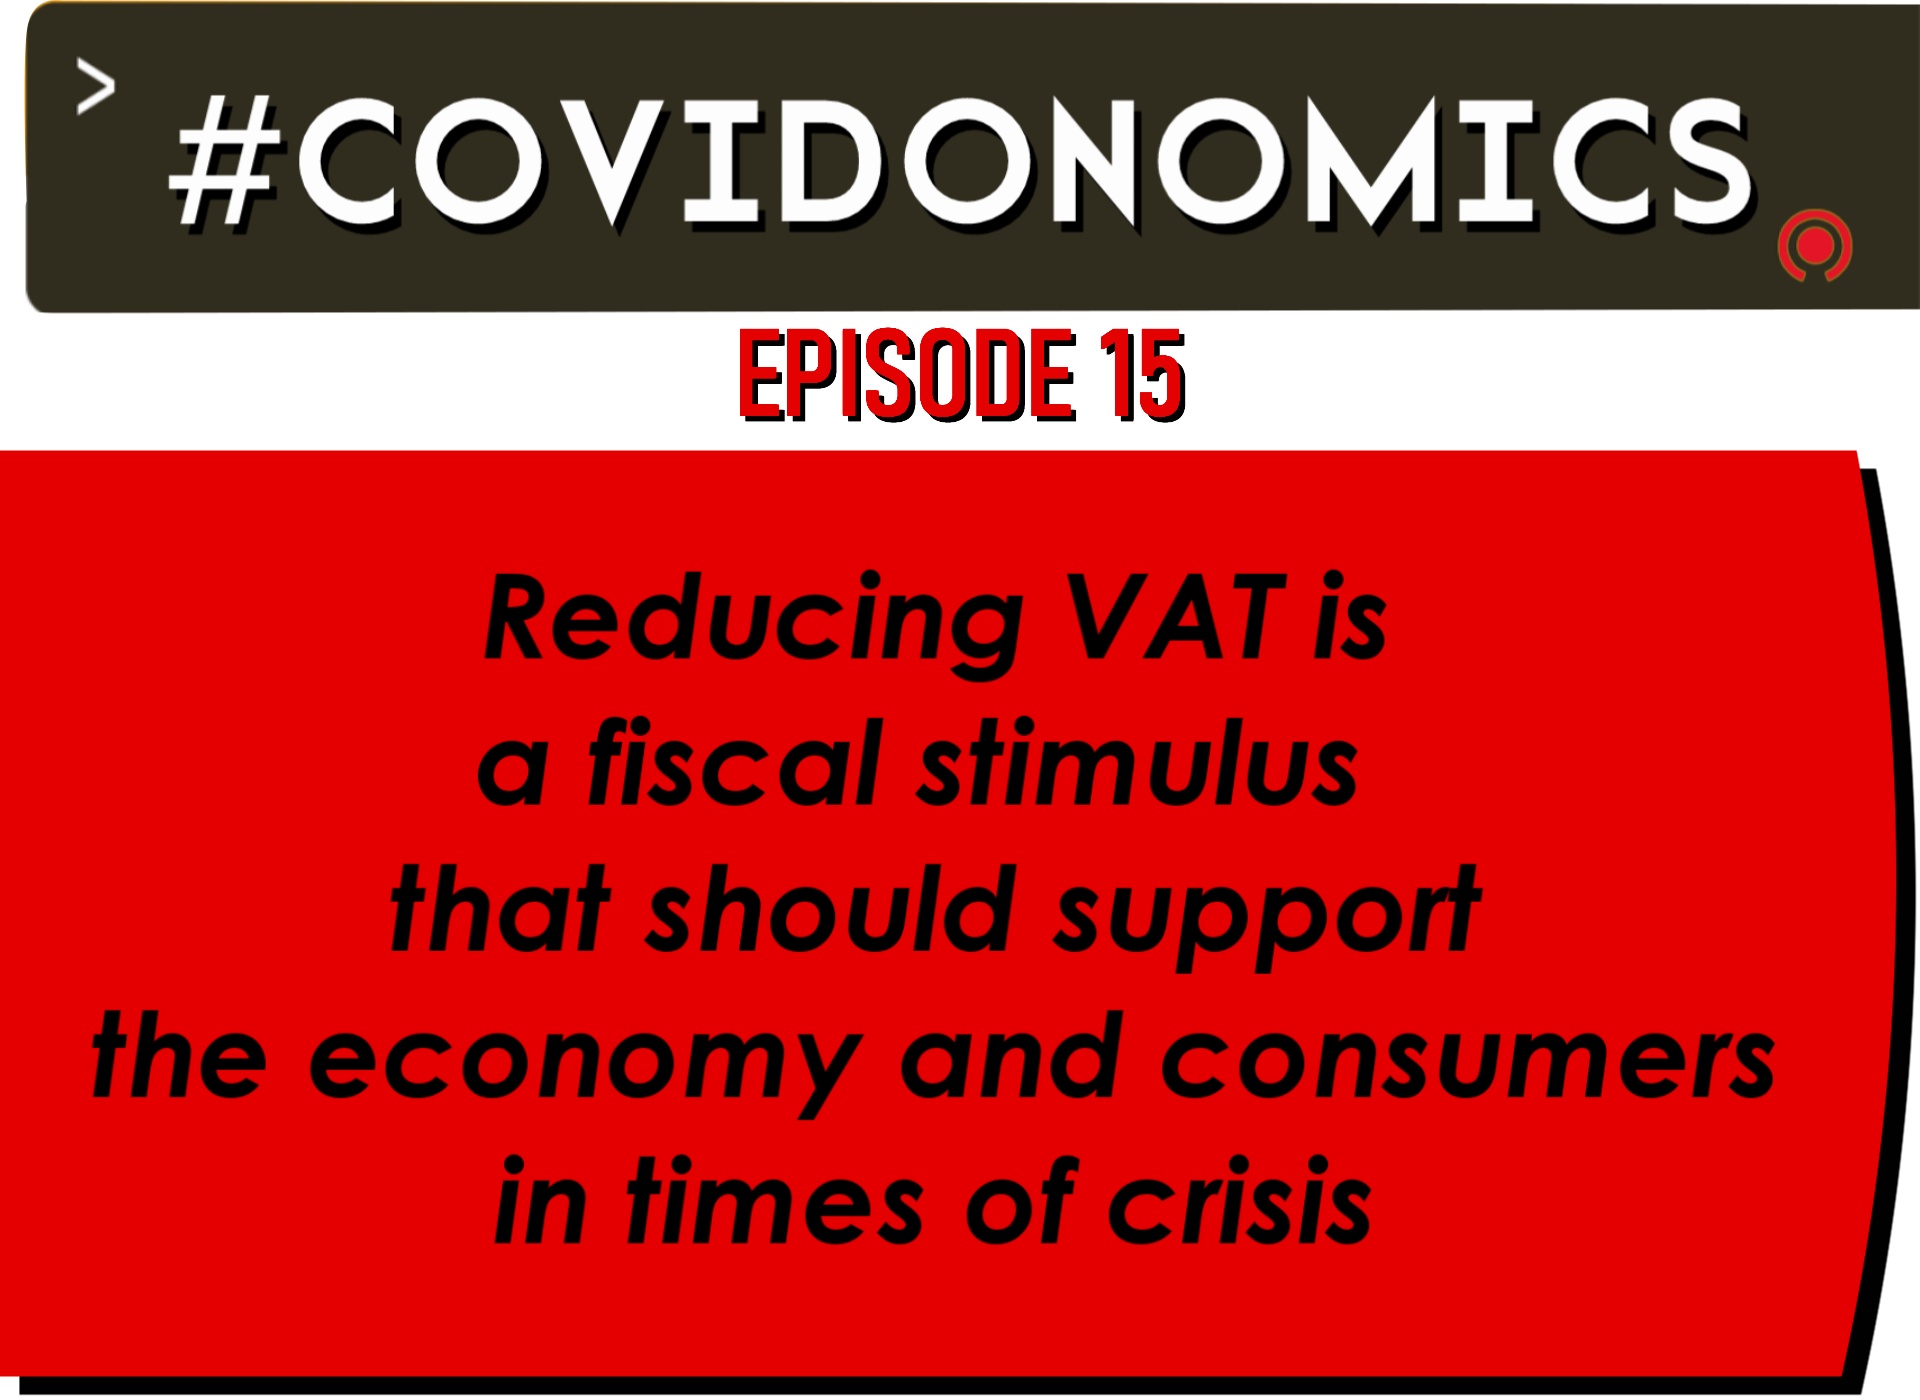 Reducing VAT is a fiscal stimulus that should support the economy and consumers in times of crisis 